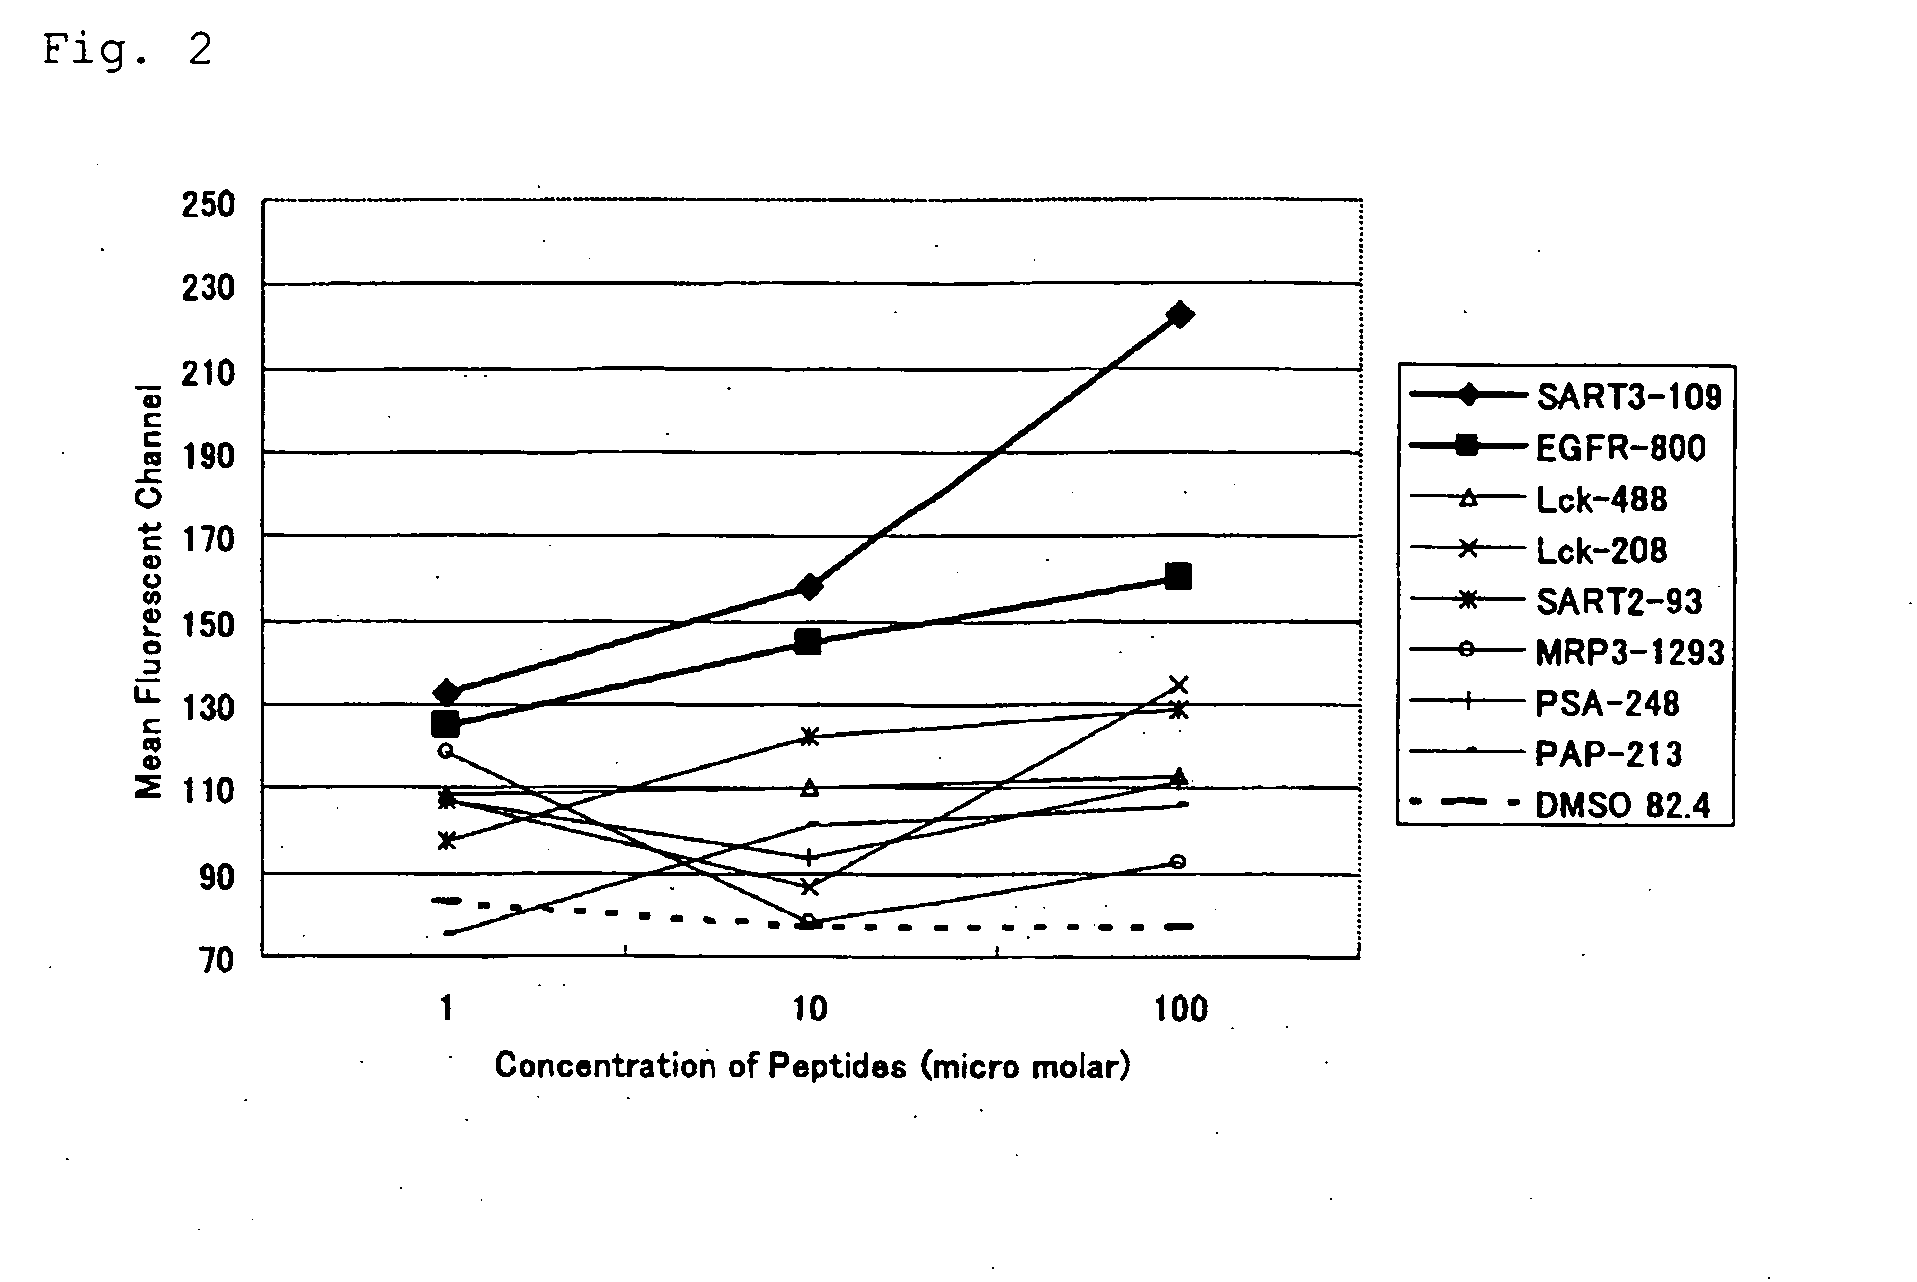 Ctl inducer composition